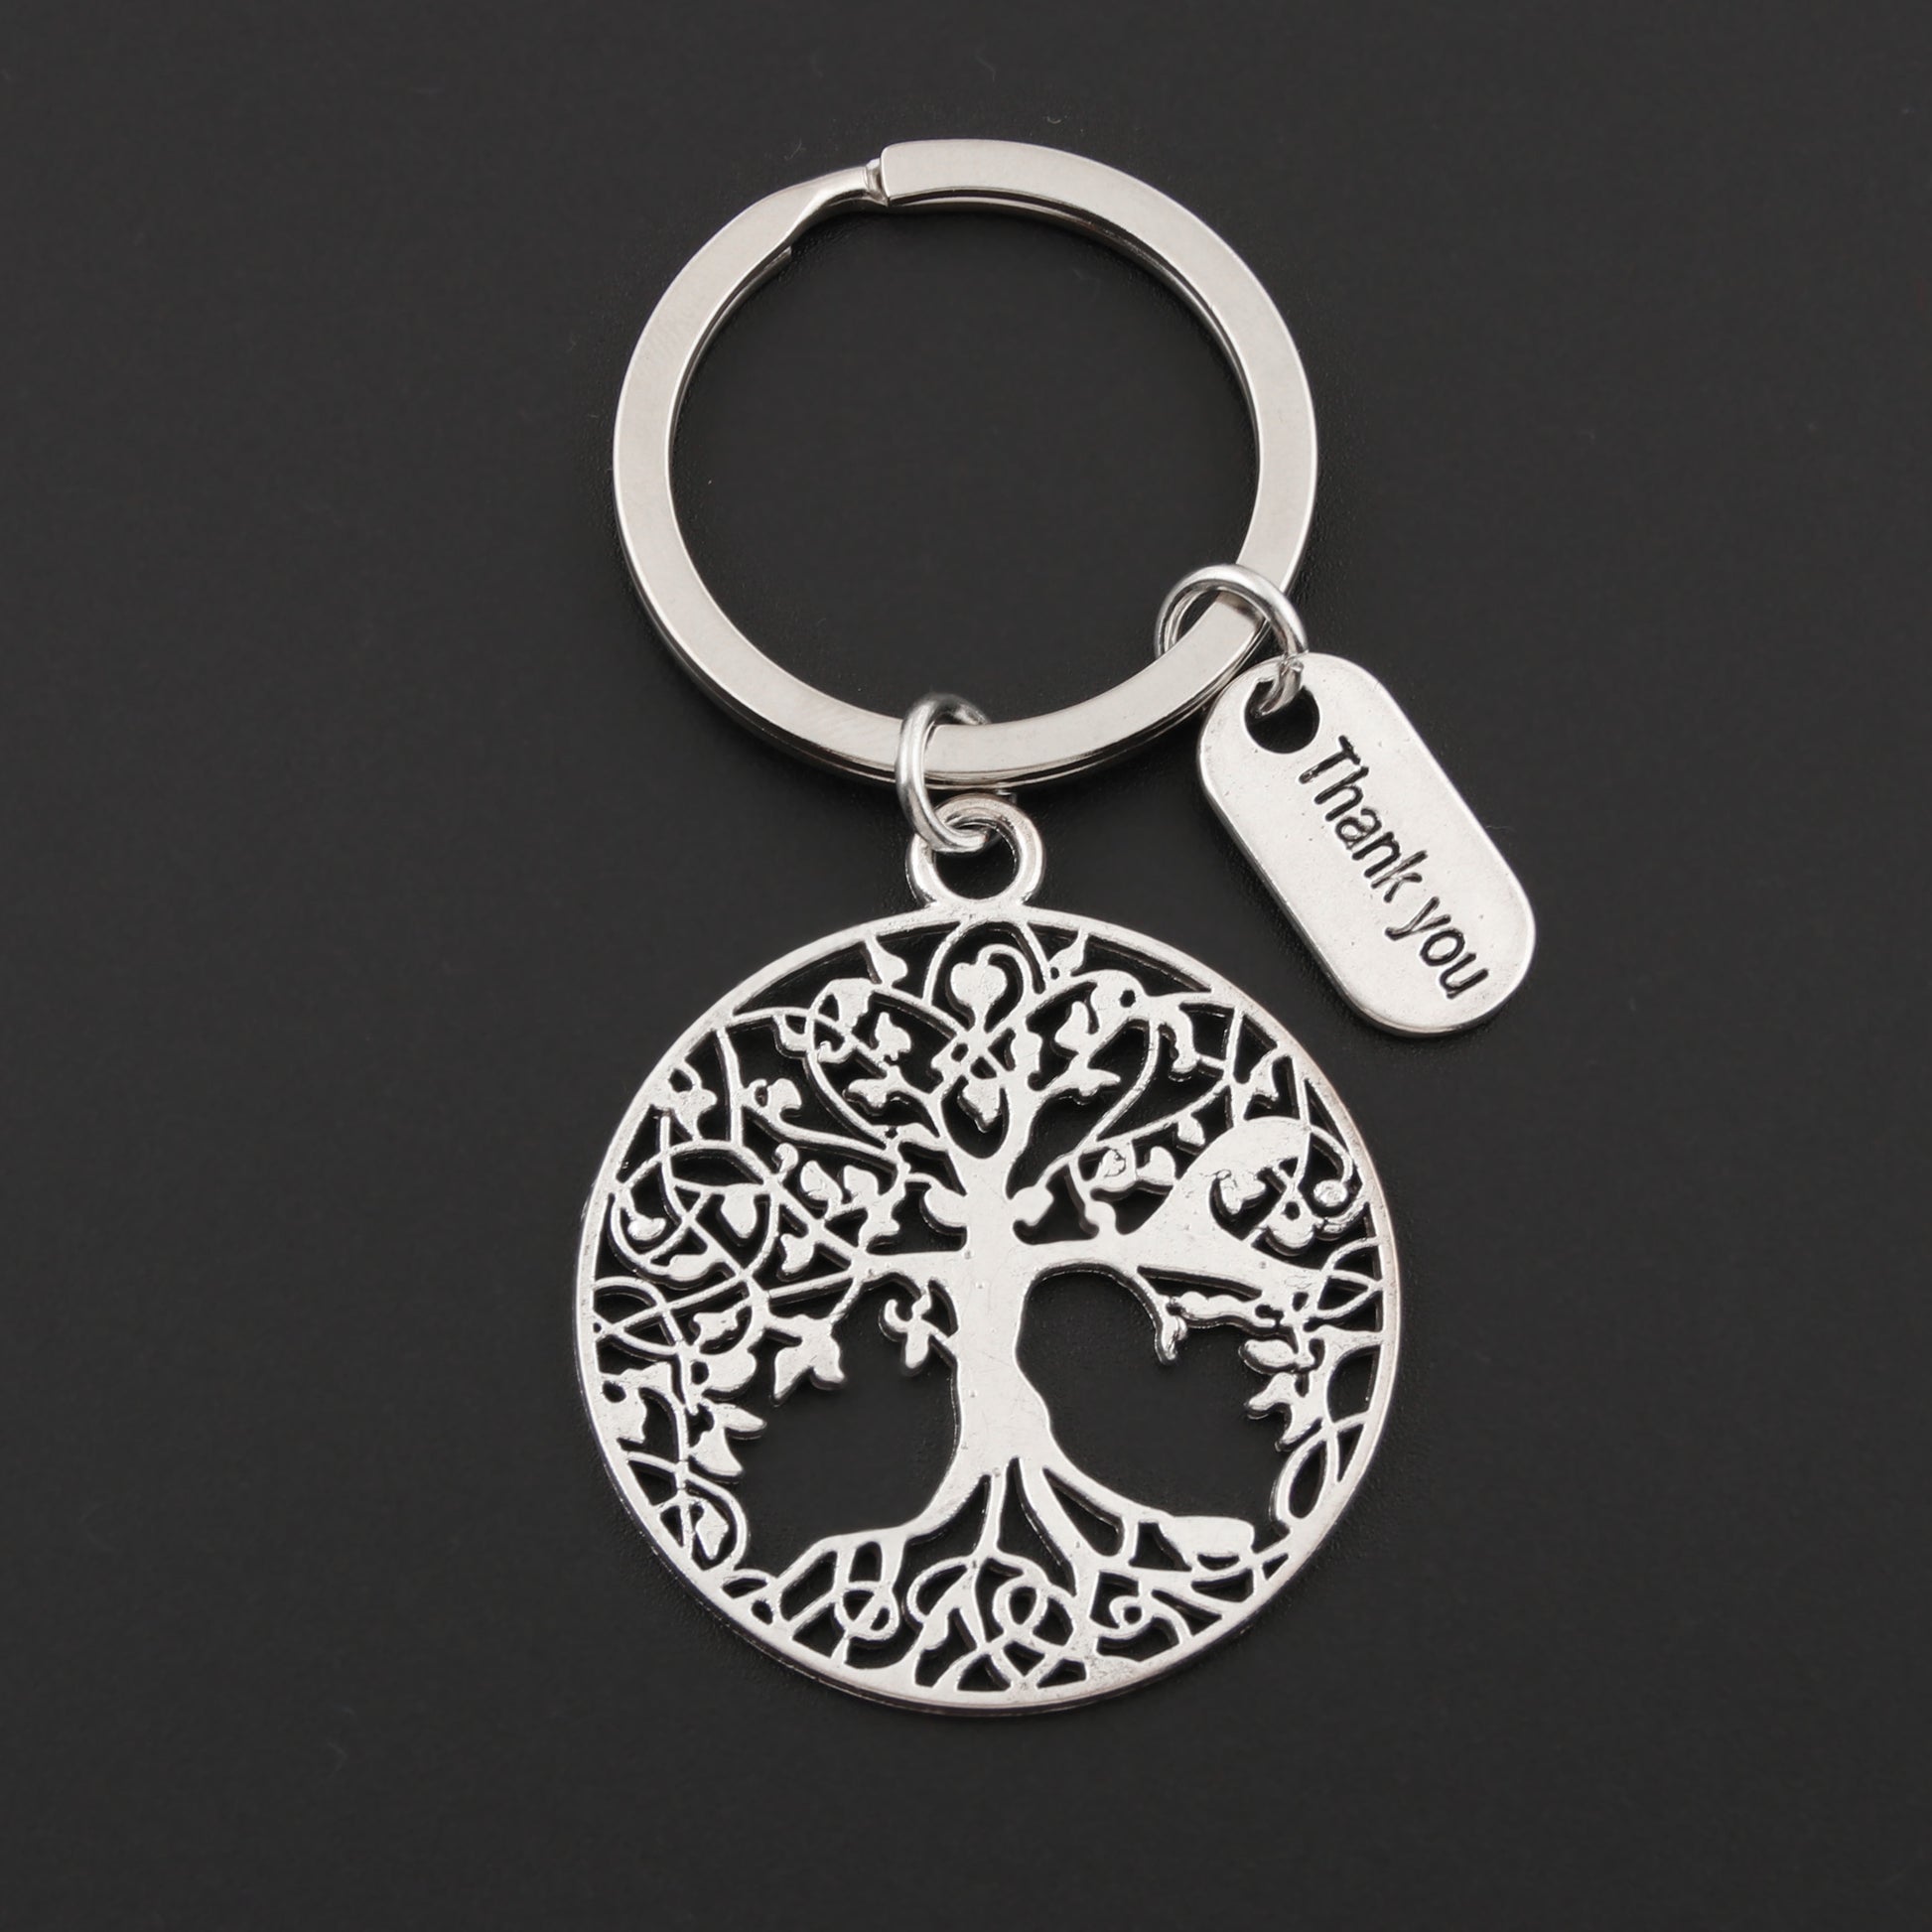 1Pc Tree KeyChain Thanksgiving Day Gift Keyring Handmade Party Souvenir Jewelry E2400 - Charlie Dolly